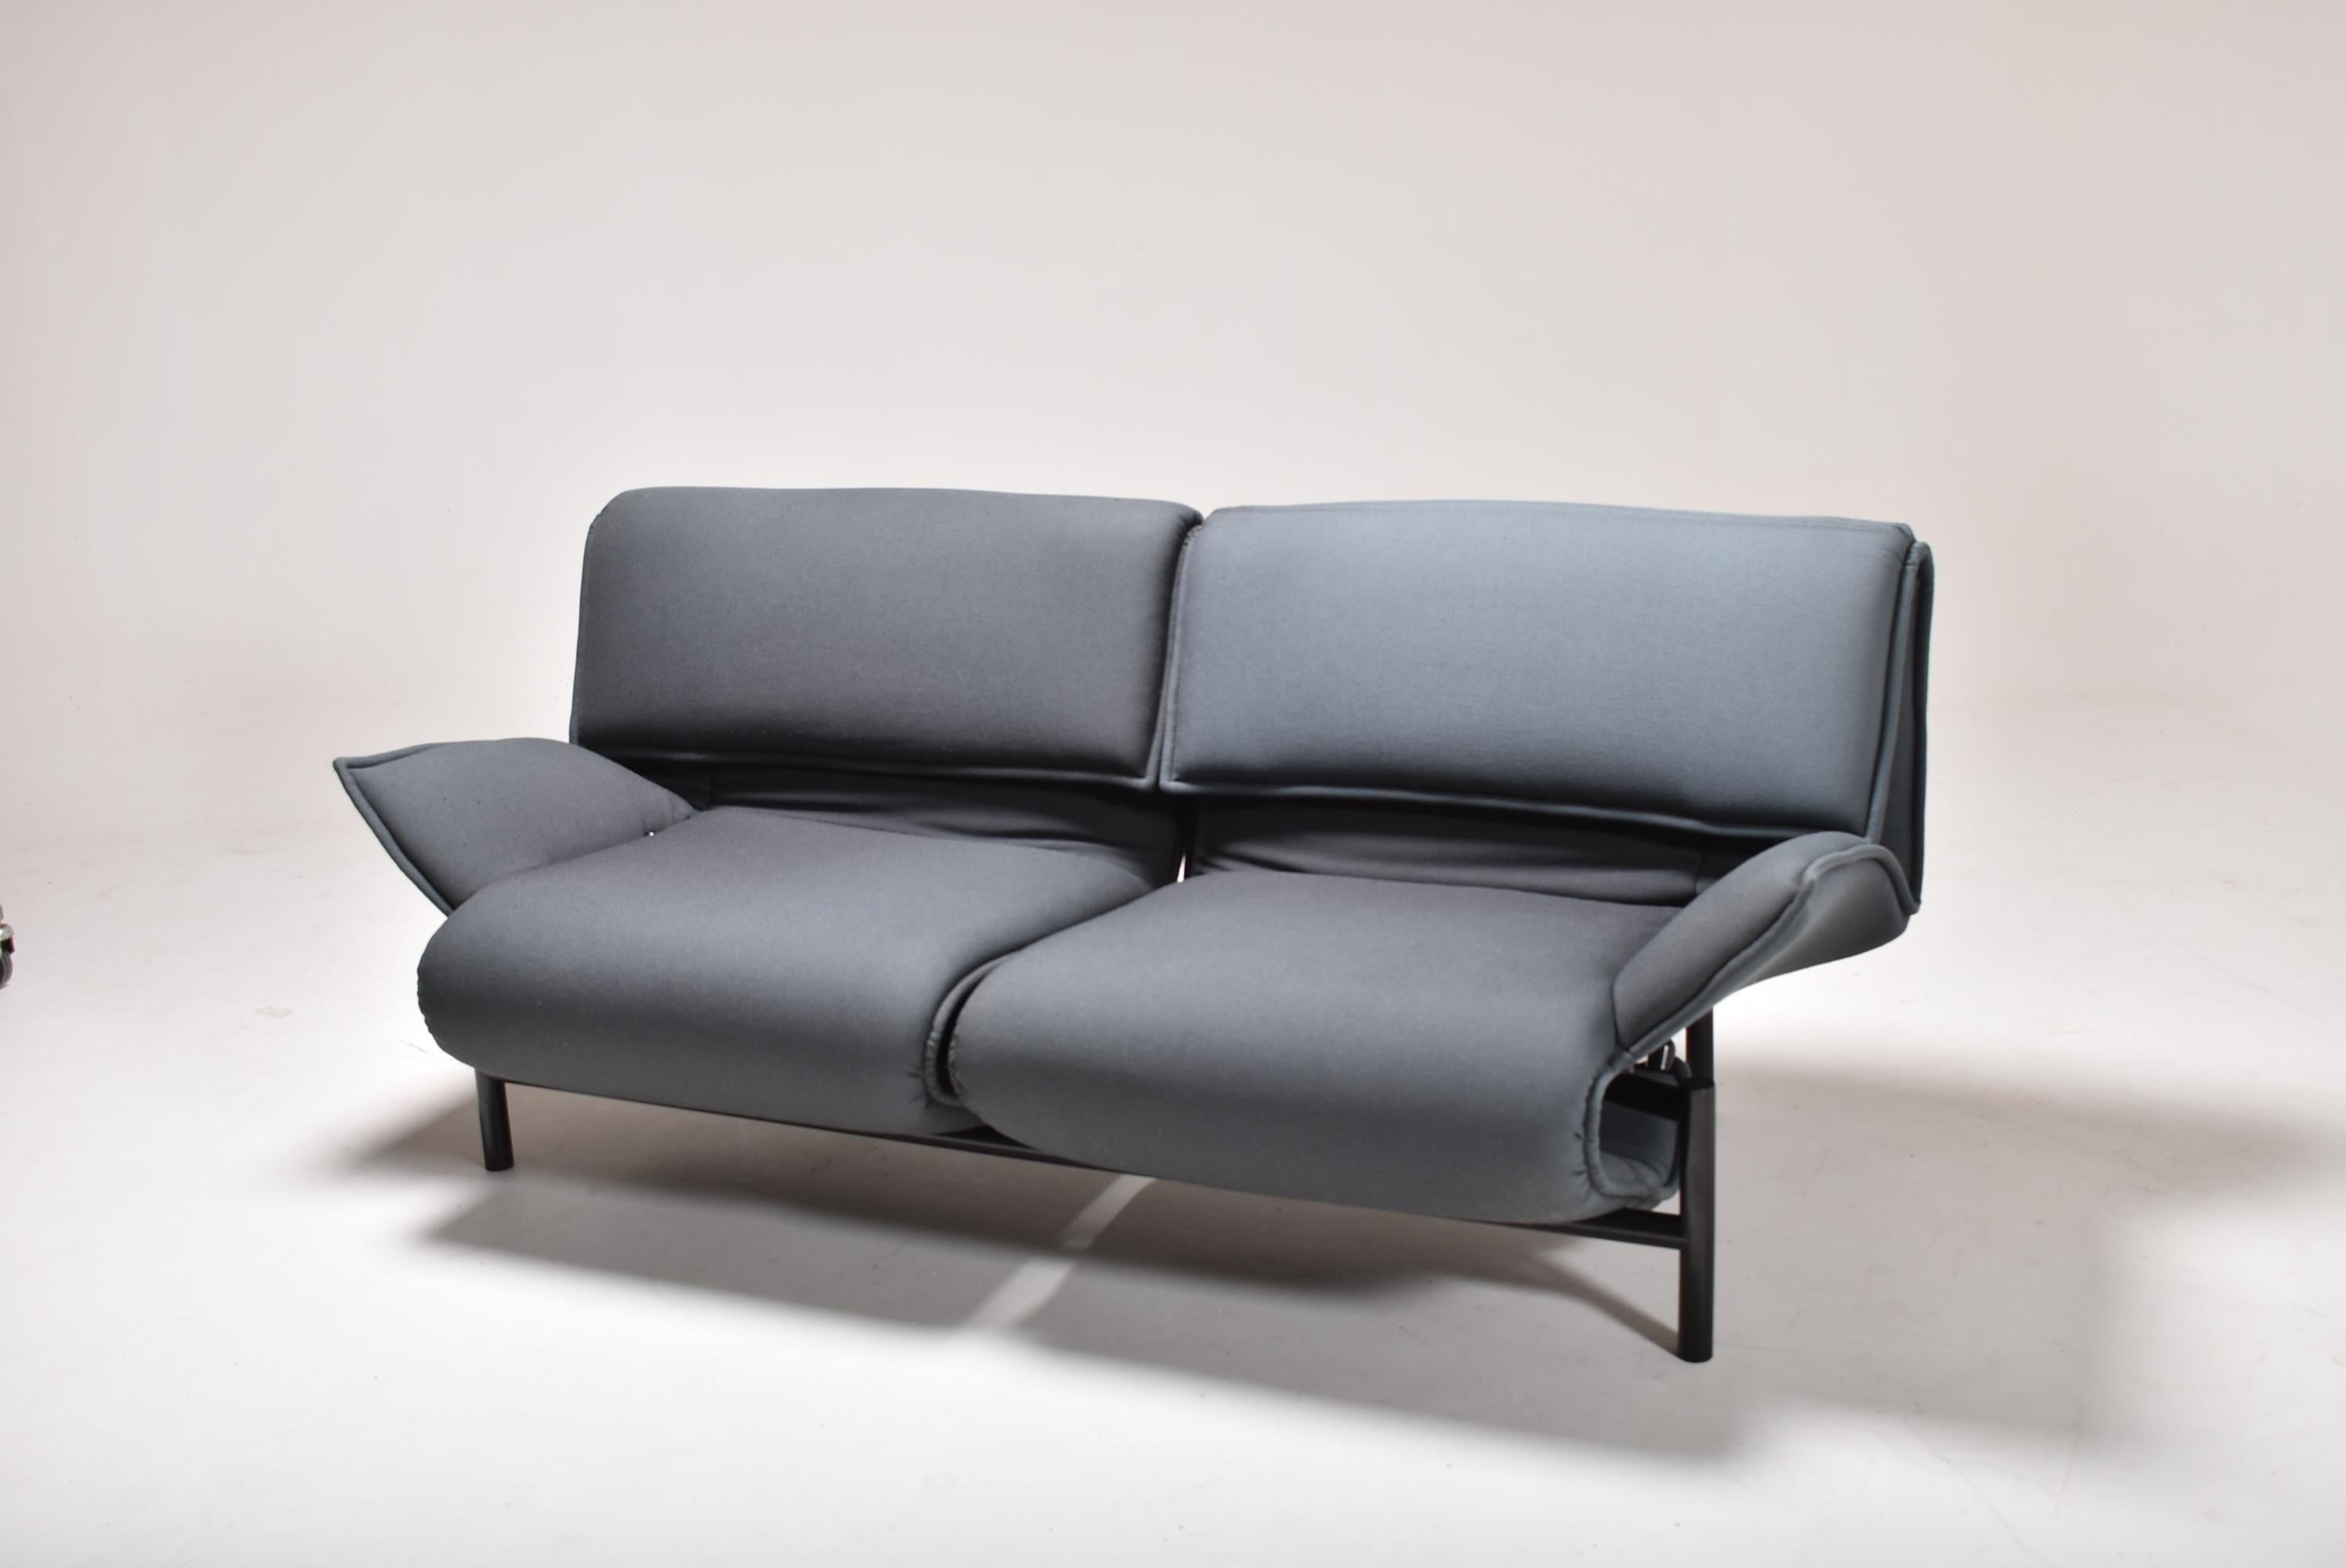 The Cassina Veranda sofa is a luxurious adjustable sofa.
The backrests can be folded up and adjusted backwards, the footrests can be extended.
Both seats can be adjusted separately.
Masterpiece of the eighties.